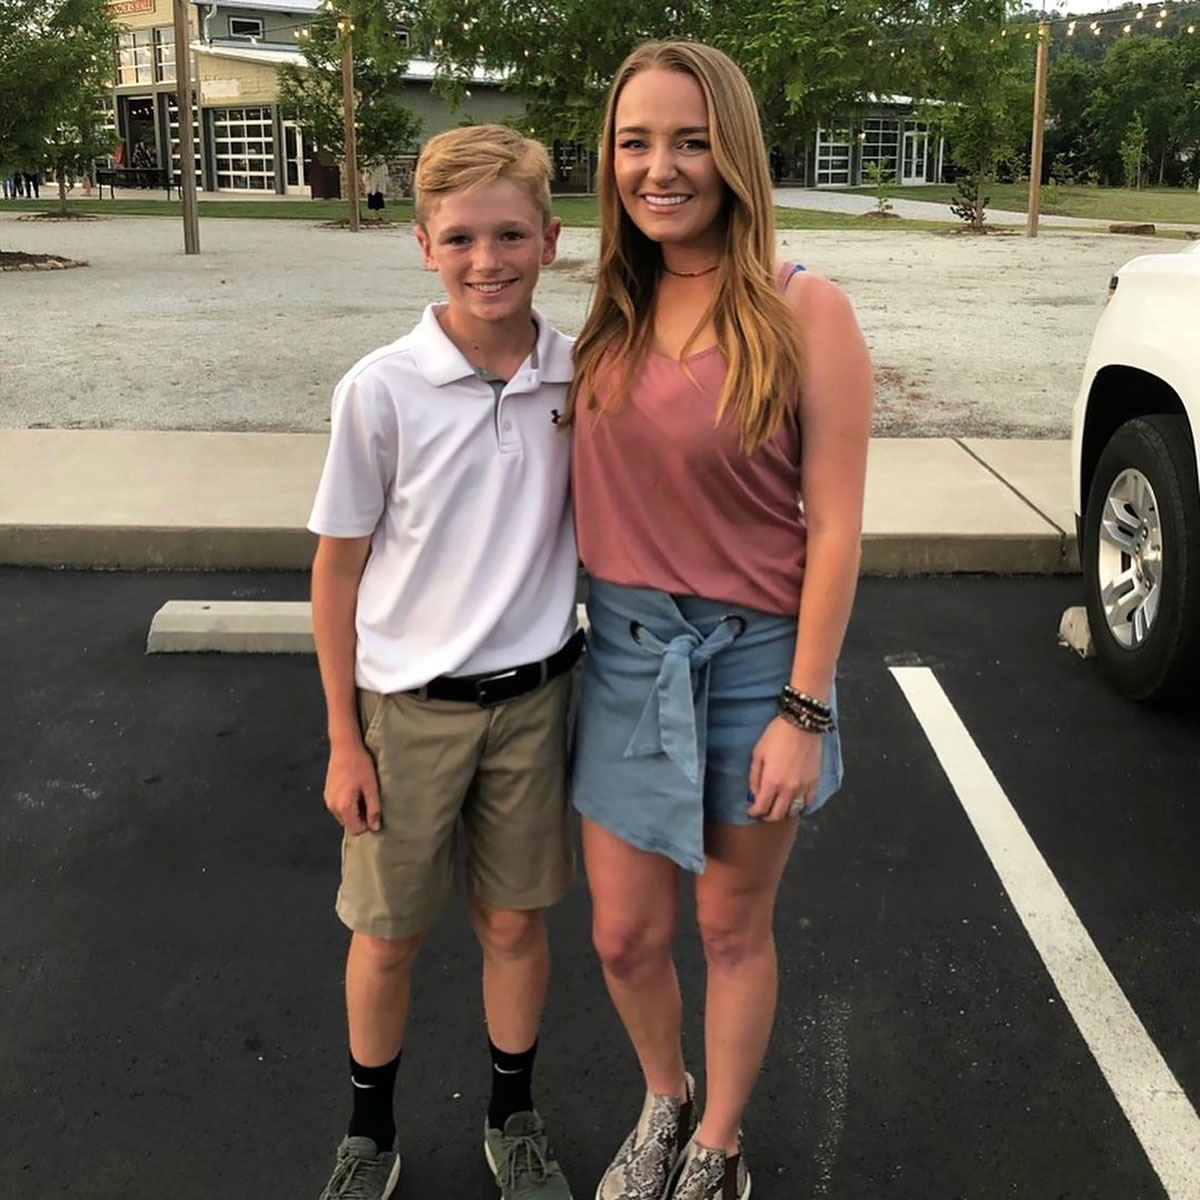 Maci Bookout Clarifies Comments About Son 'Cutting Weight' for Wr...